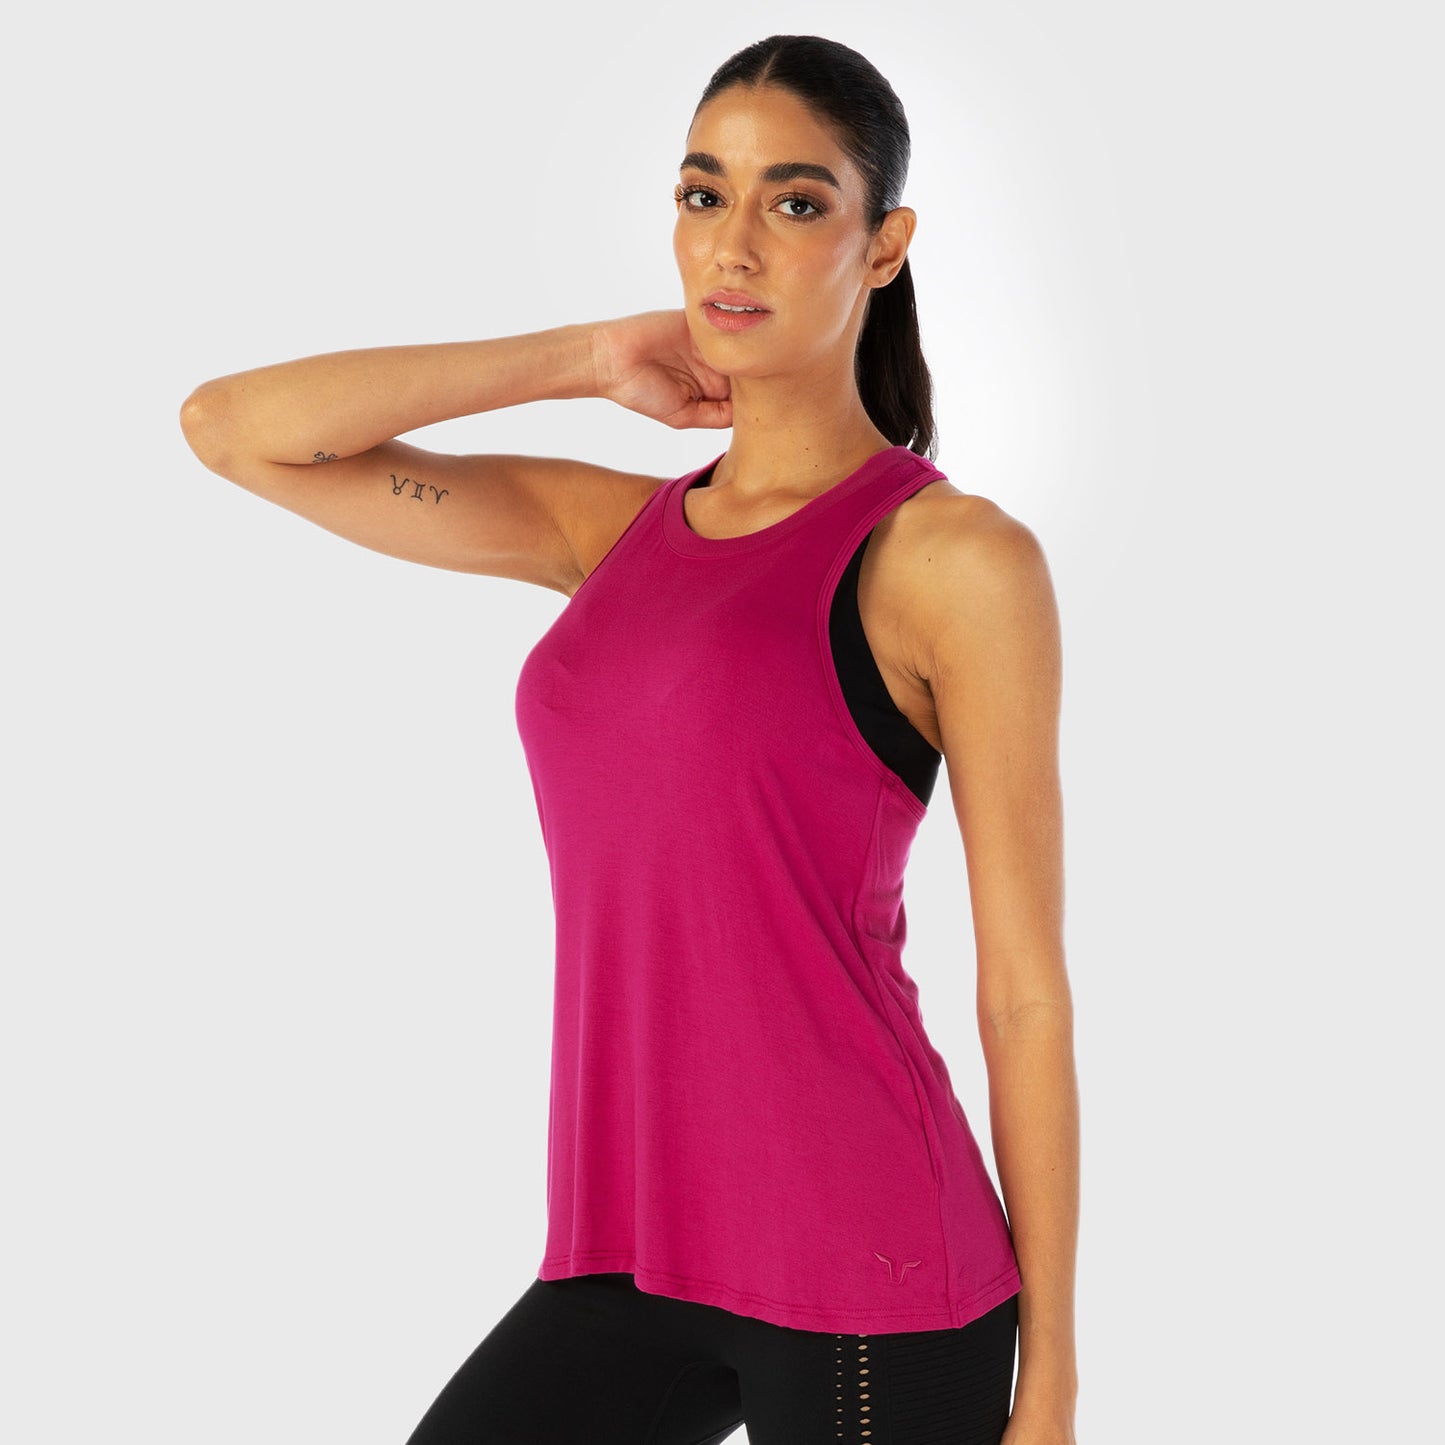 squatwolf-workout-clothes-infinity-longline-workout-tank-festive-fuchsia-gym-tank-tops-for-women